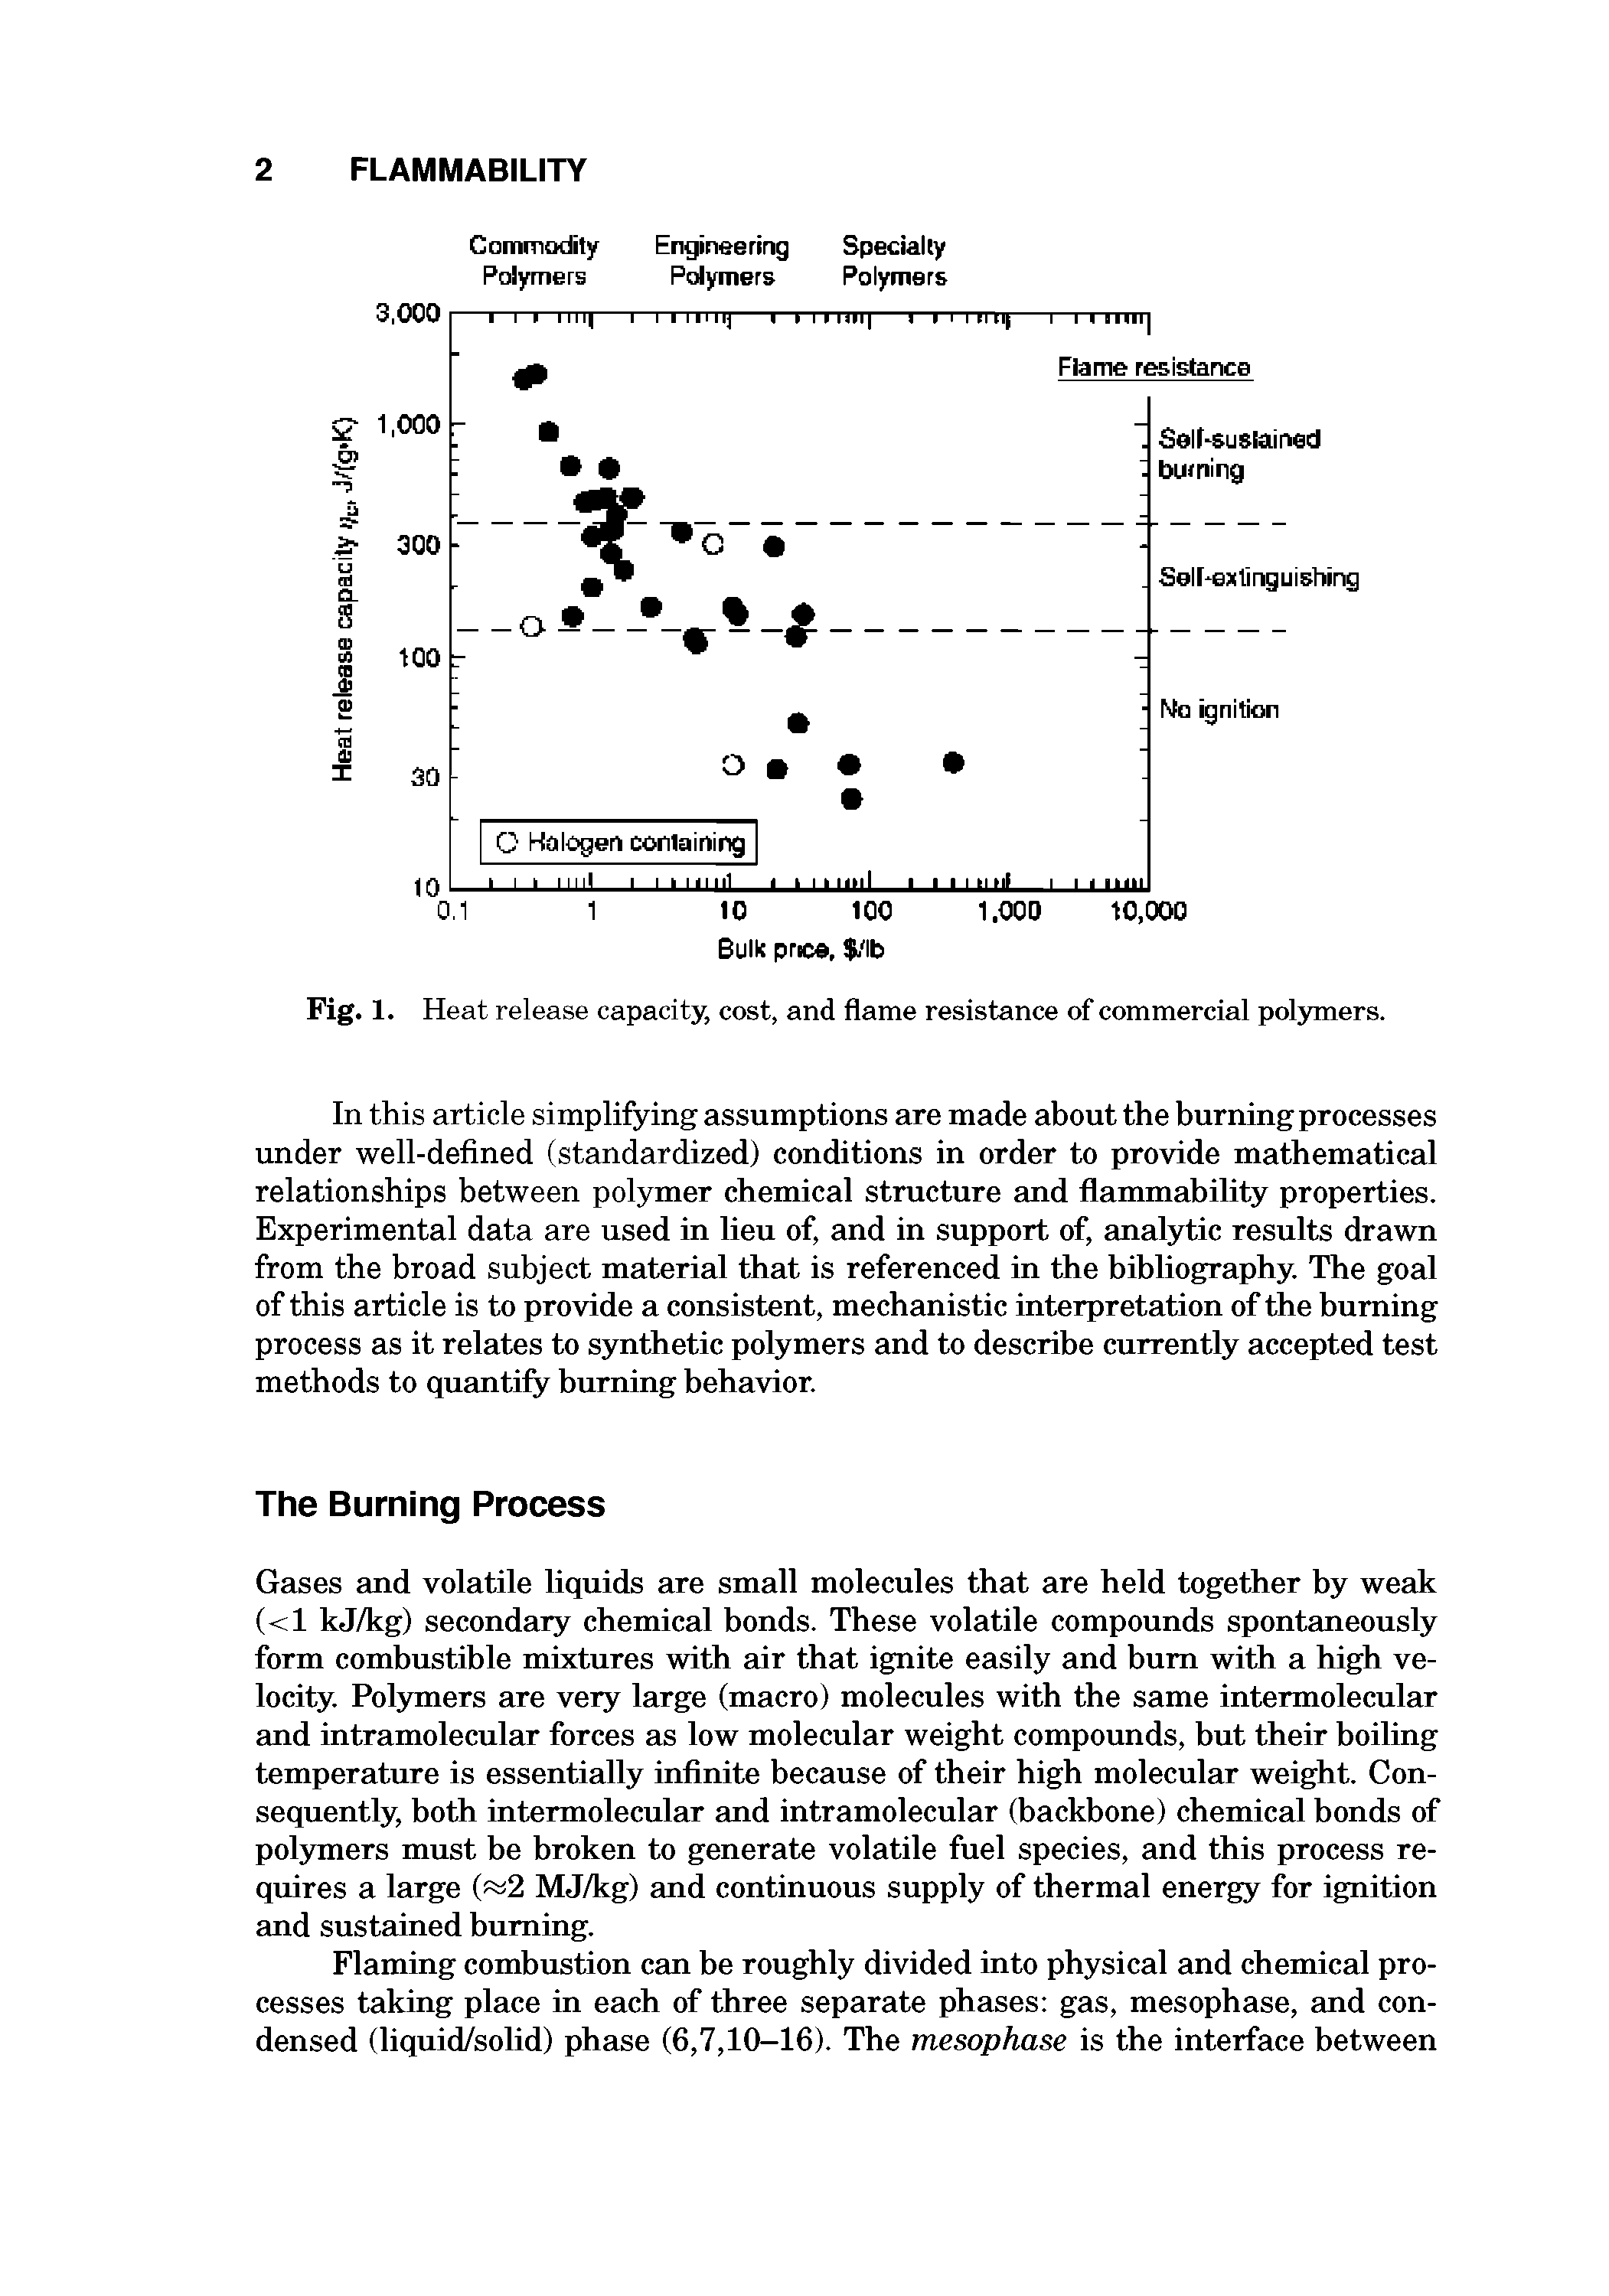 Fig. 1. Heat release capacity, cost, and flame resistance of commercial polymers.